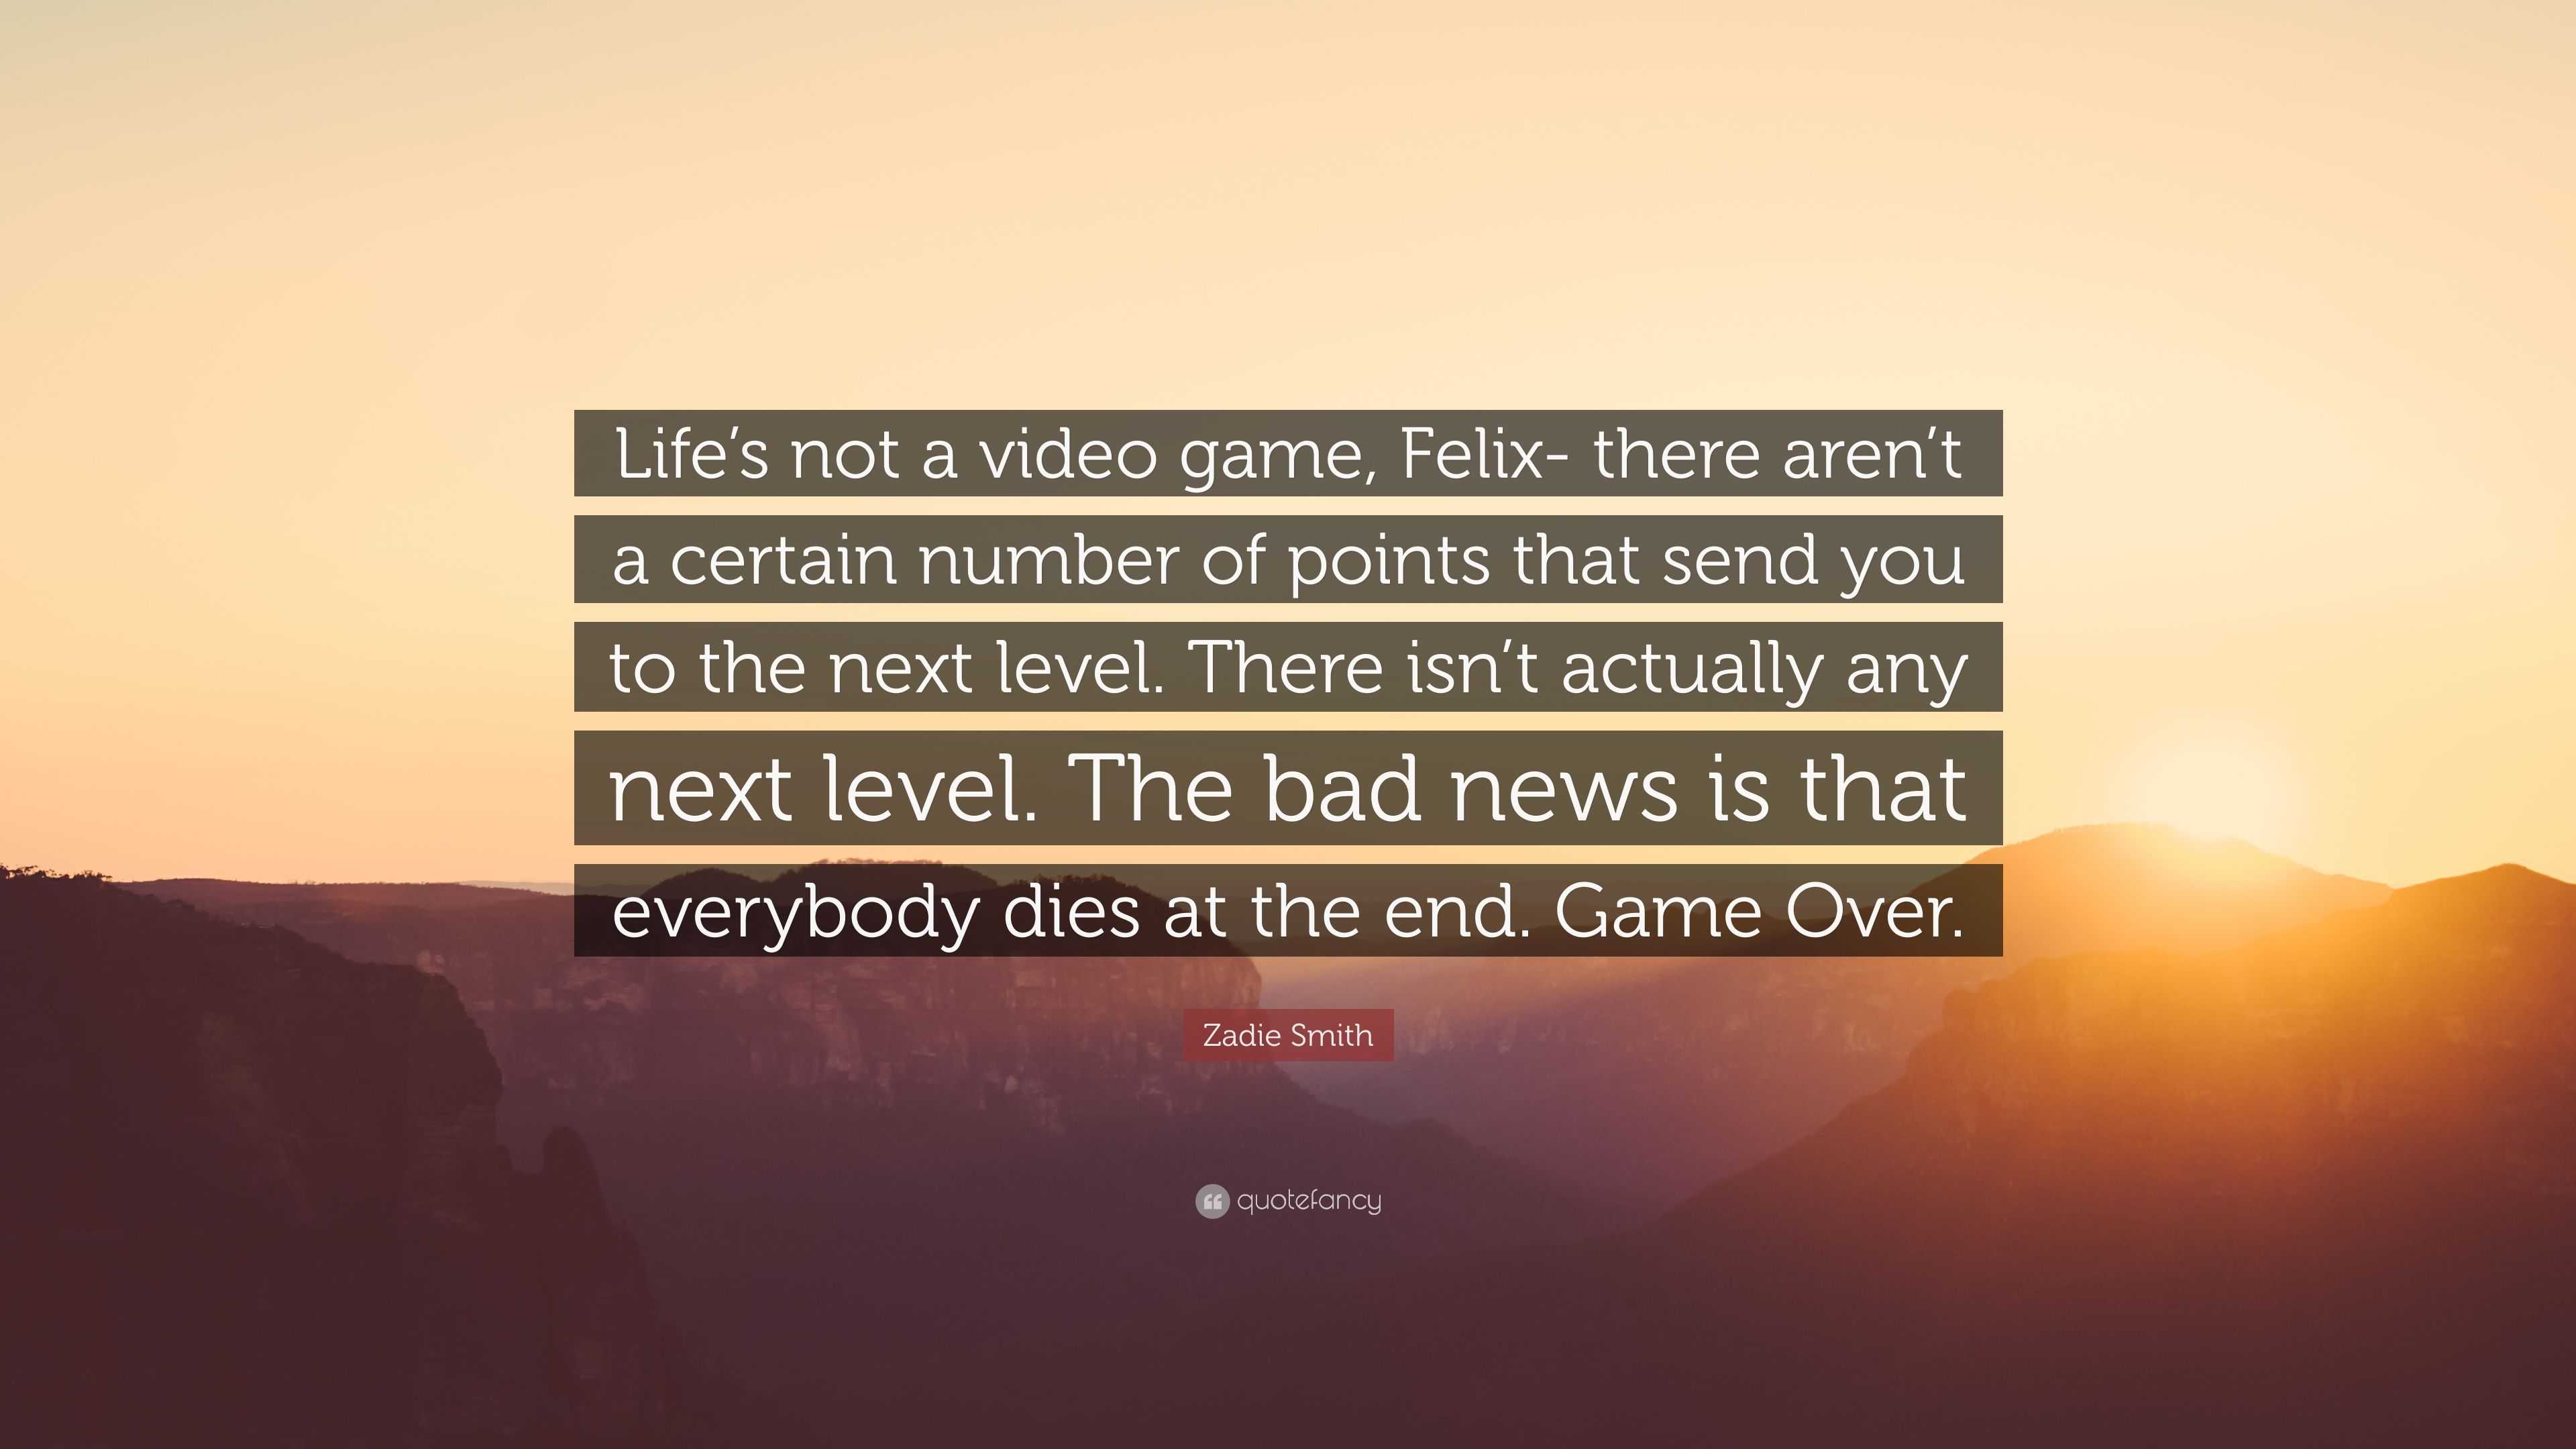 Zadie Smith Quote Life S Not A Video Game Felix There Aren T A Certain Number Of Points That Send You To The Next Level There Isn T Act